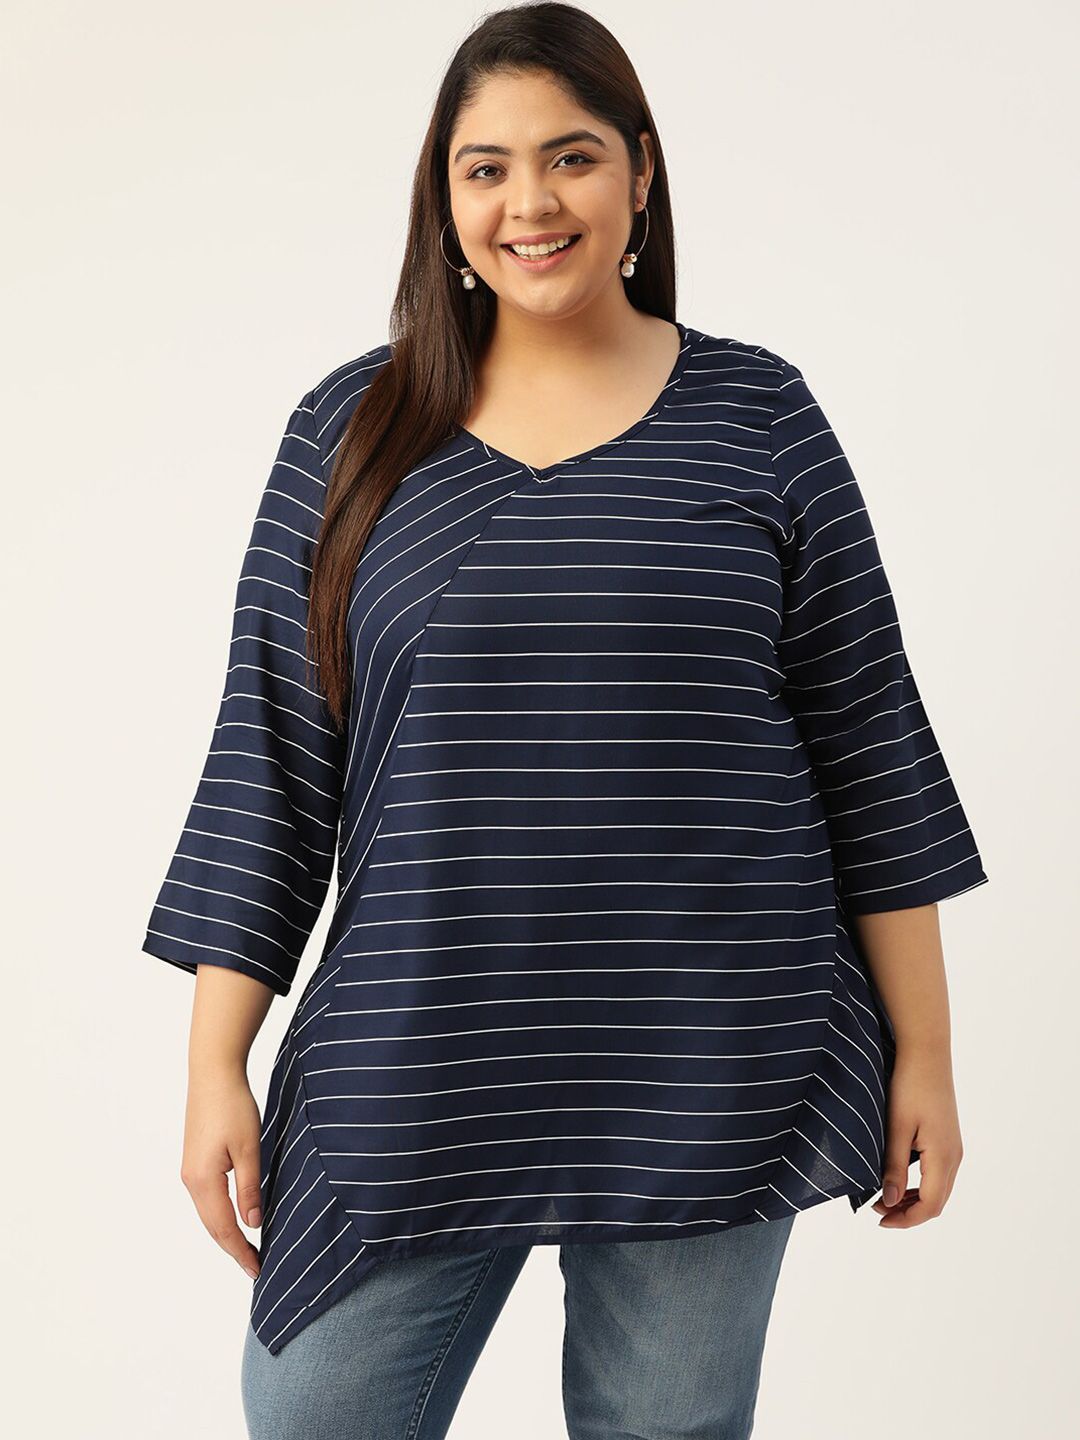 theRebelinme Women Navy Blue Plus Size Printed Striped Casual Top Price in India